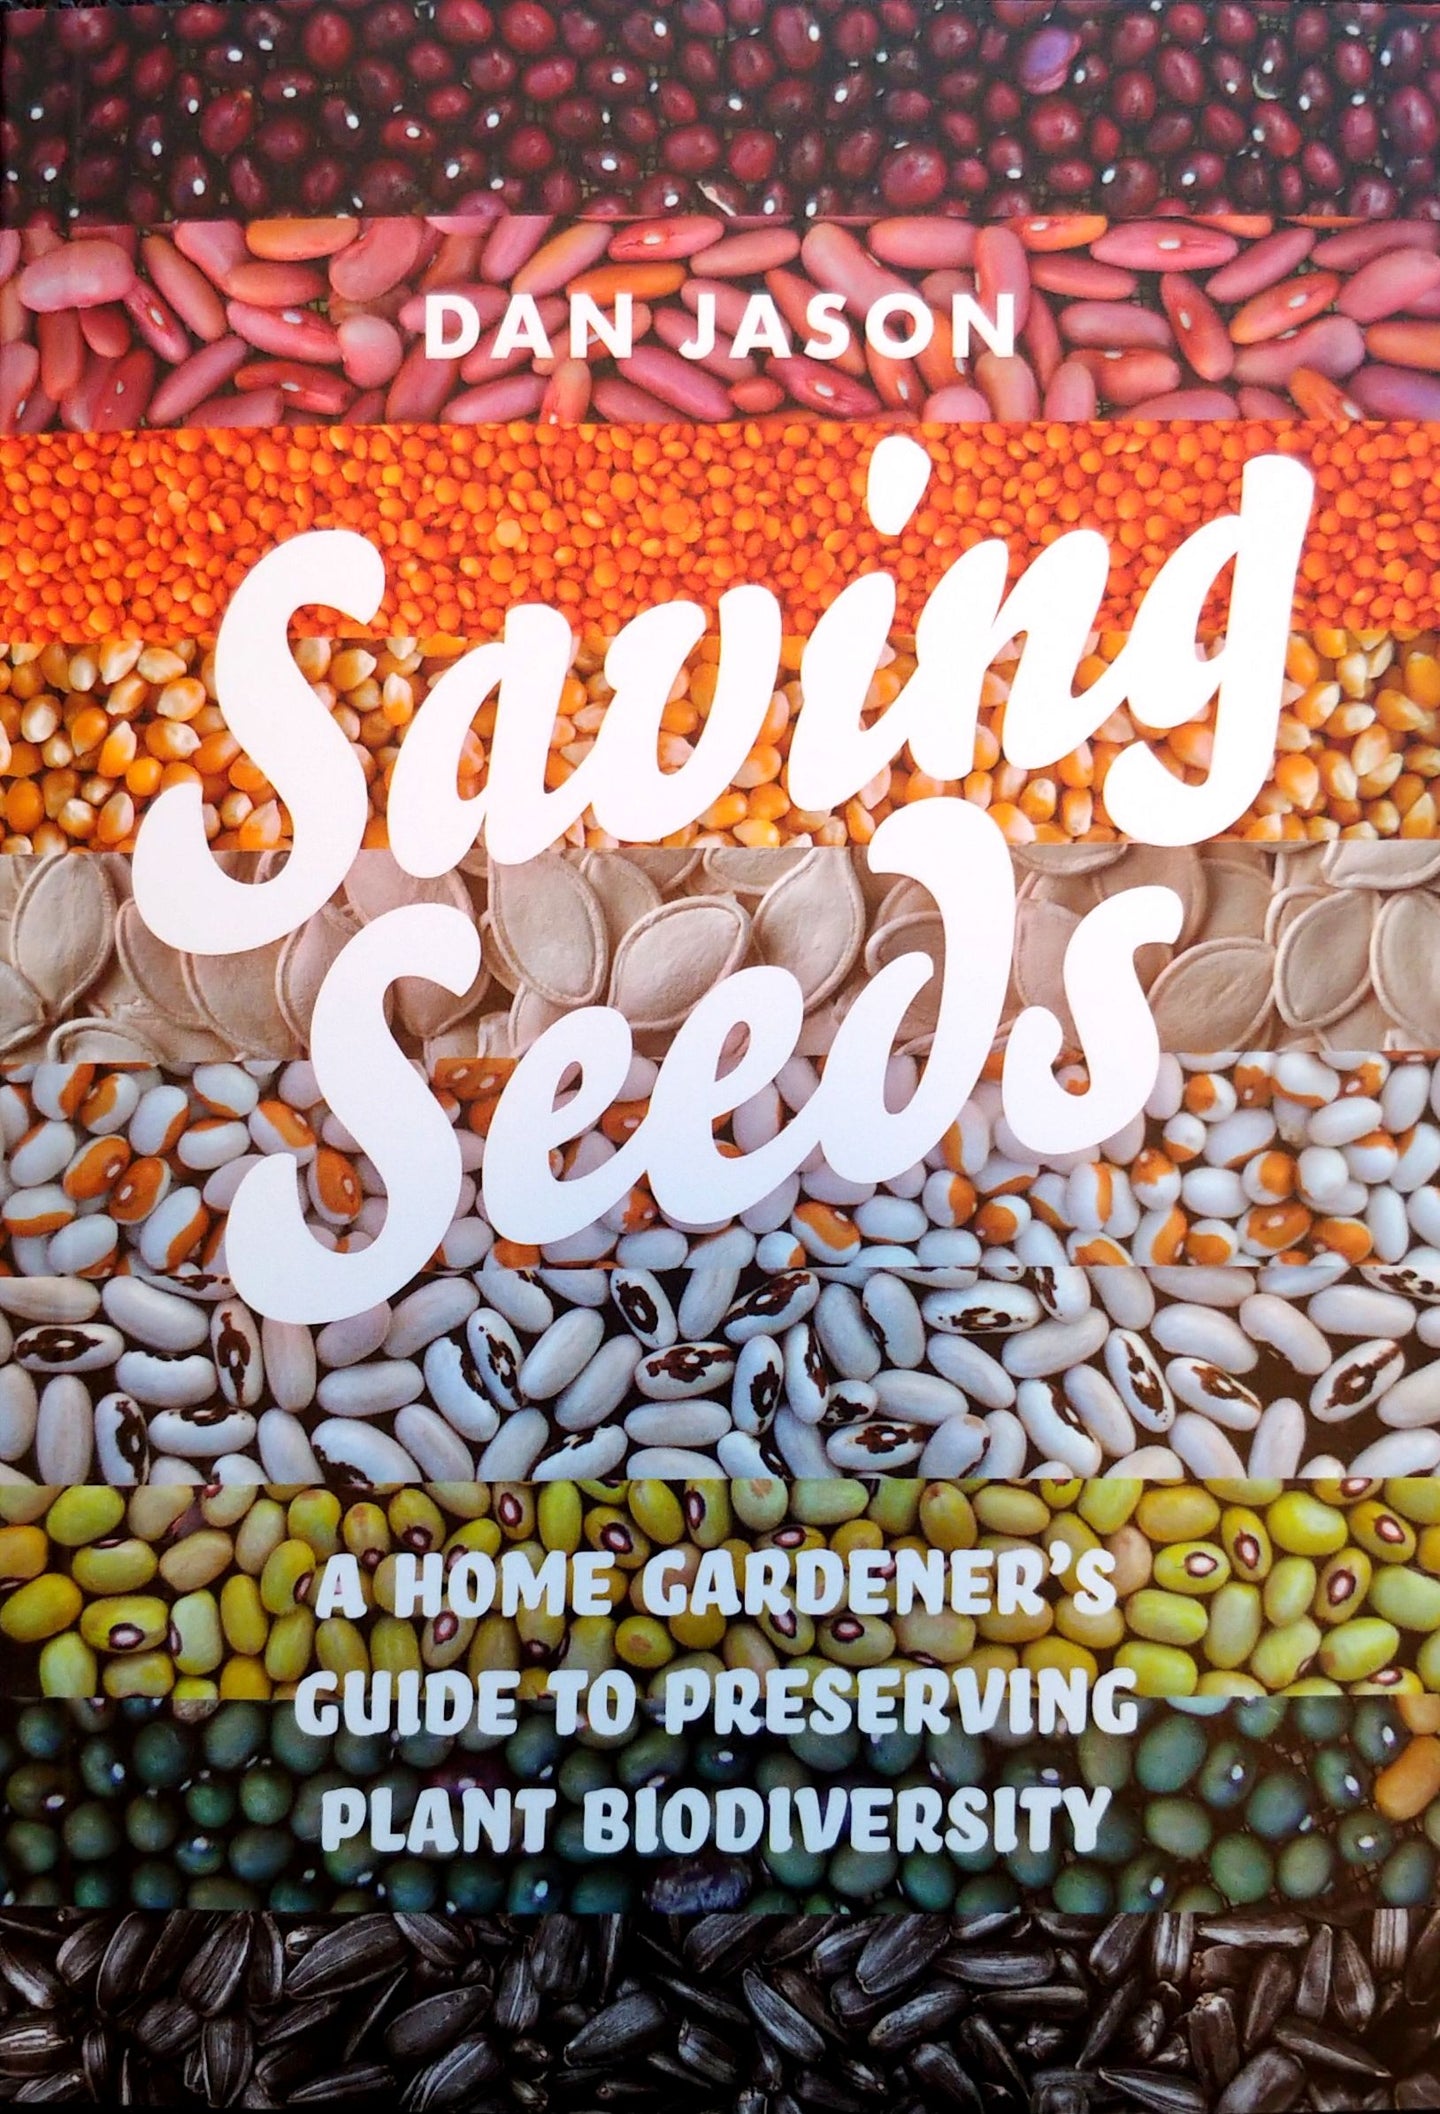 Book Cover of Saving Seeds: A Home Gardener's Guide to Preserving Plant Biodiversity